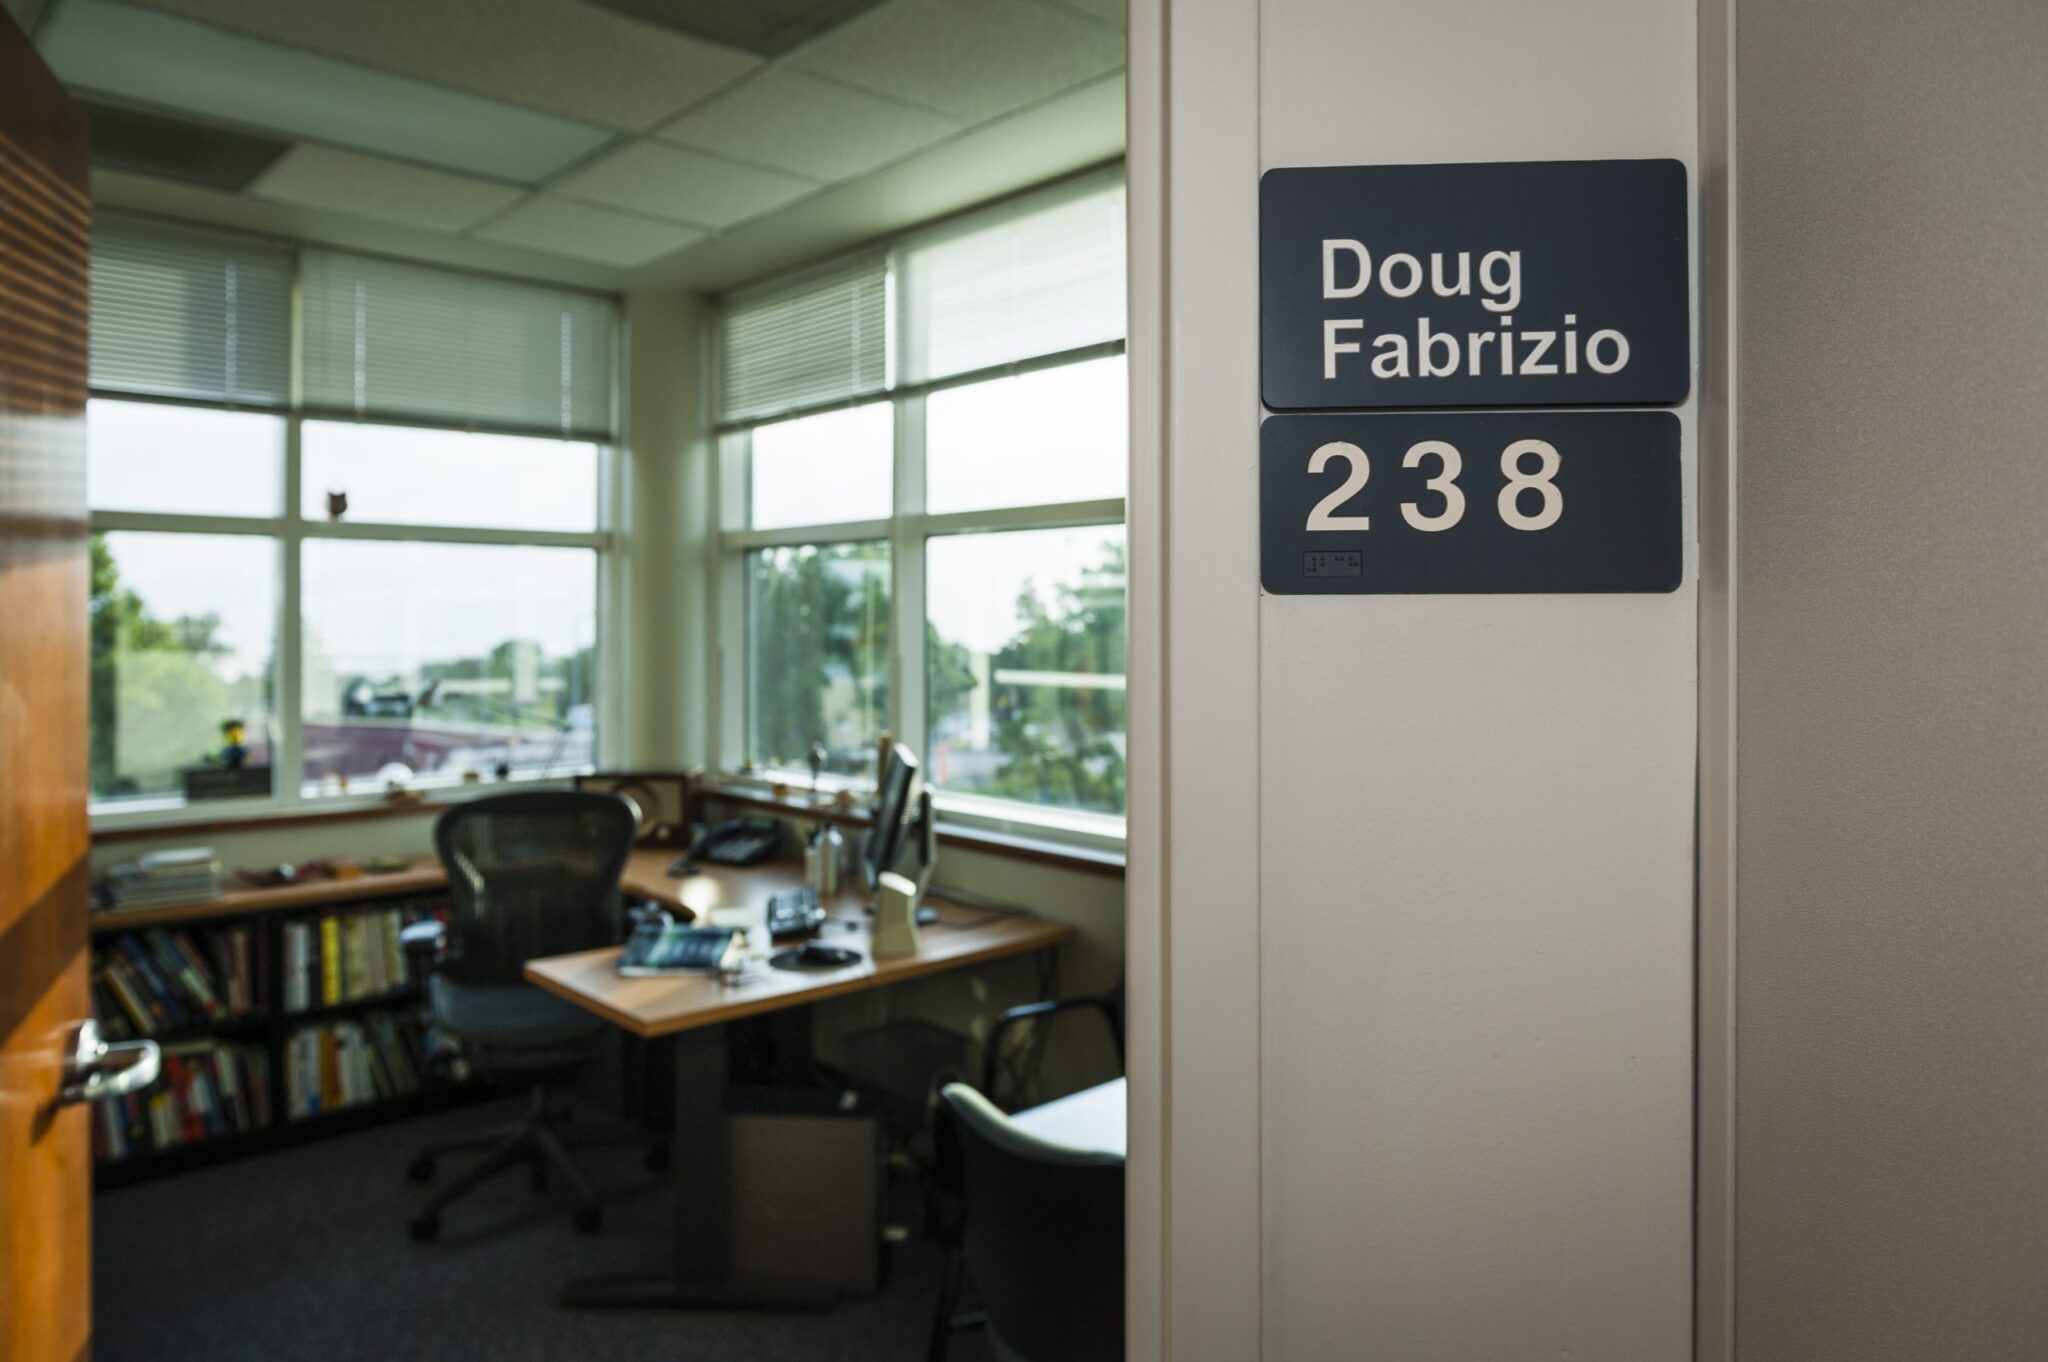 The office number of radio personality Doug Fabrizio reads 238.